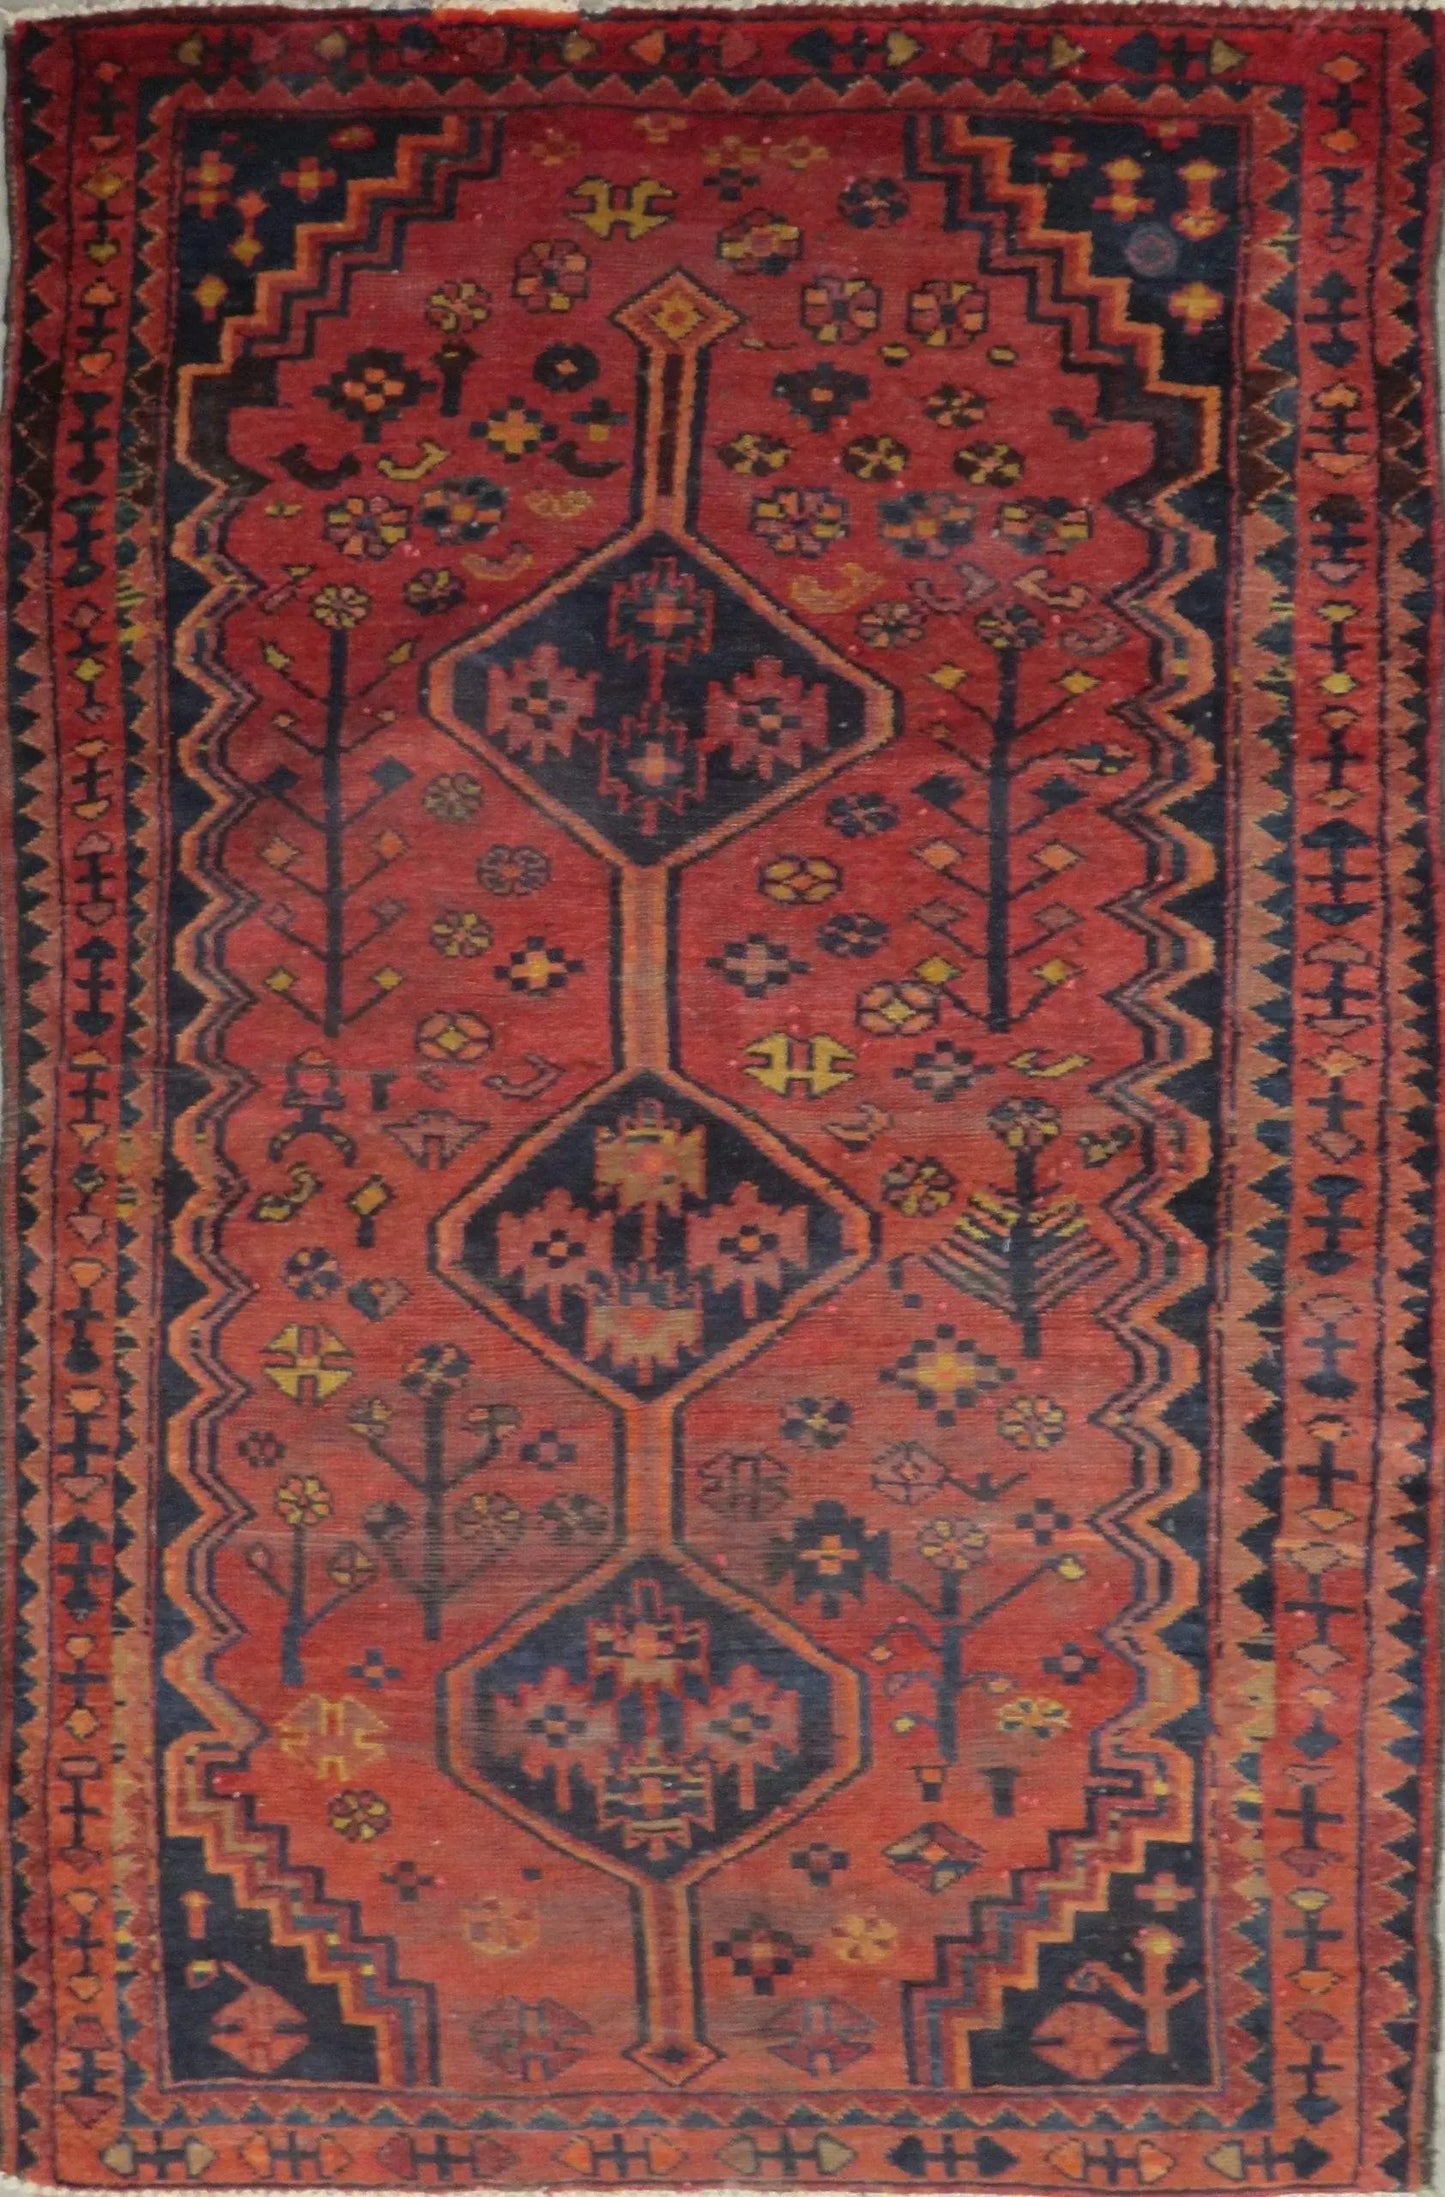 Hand-Knotted Vintage Rug 6'4" x 4'2"